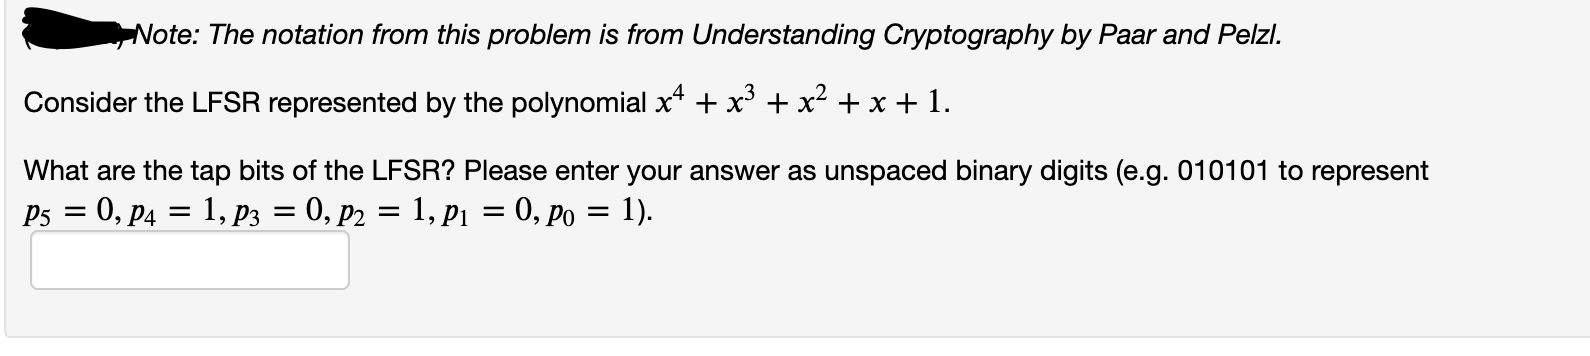 Consider the LFSR represented by the polynomial x* + x* + x² + x + 1.
What are the tap bits of the LFSR? Please enter your answer as unspaced binary digits (e.g. 010101 to represent
P5 = 0, P4 = 1, p3 = 0, p2 = 1, p1 = 0, po = 1).
